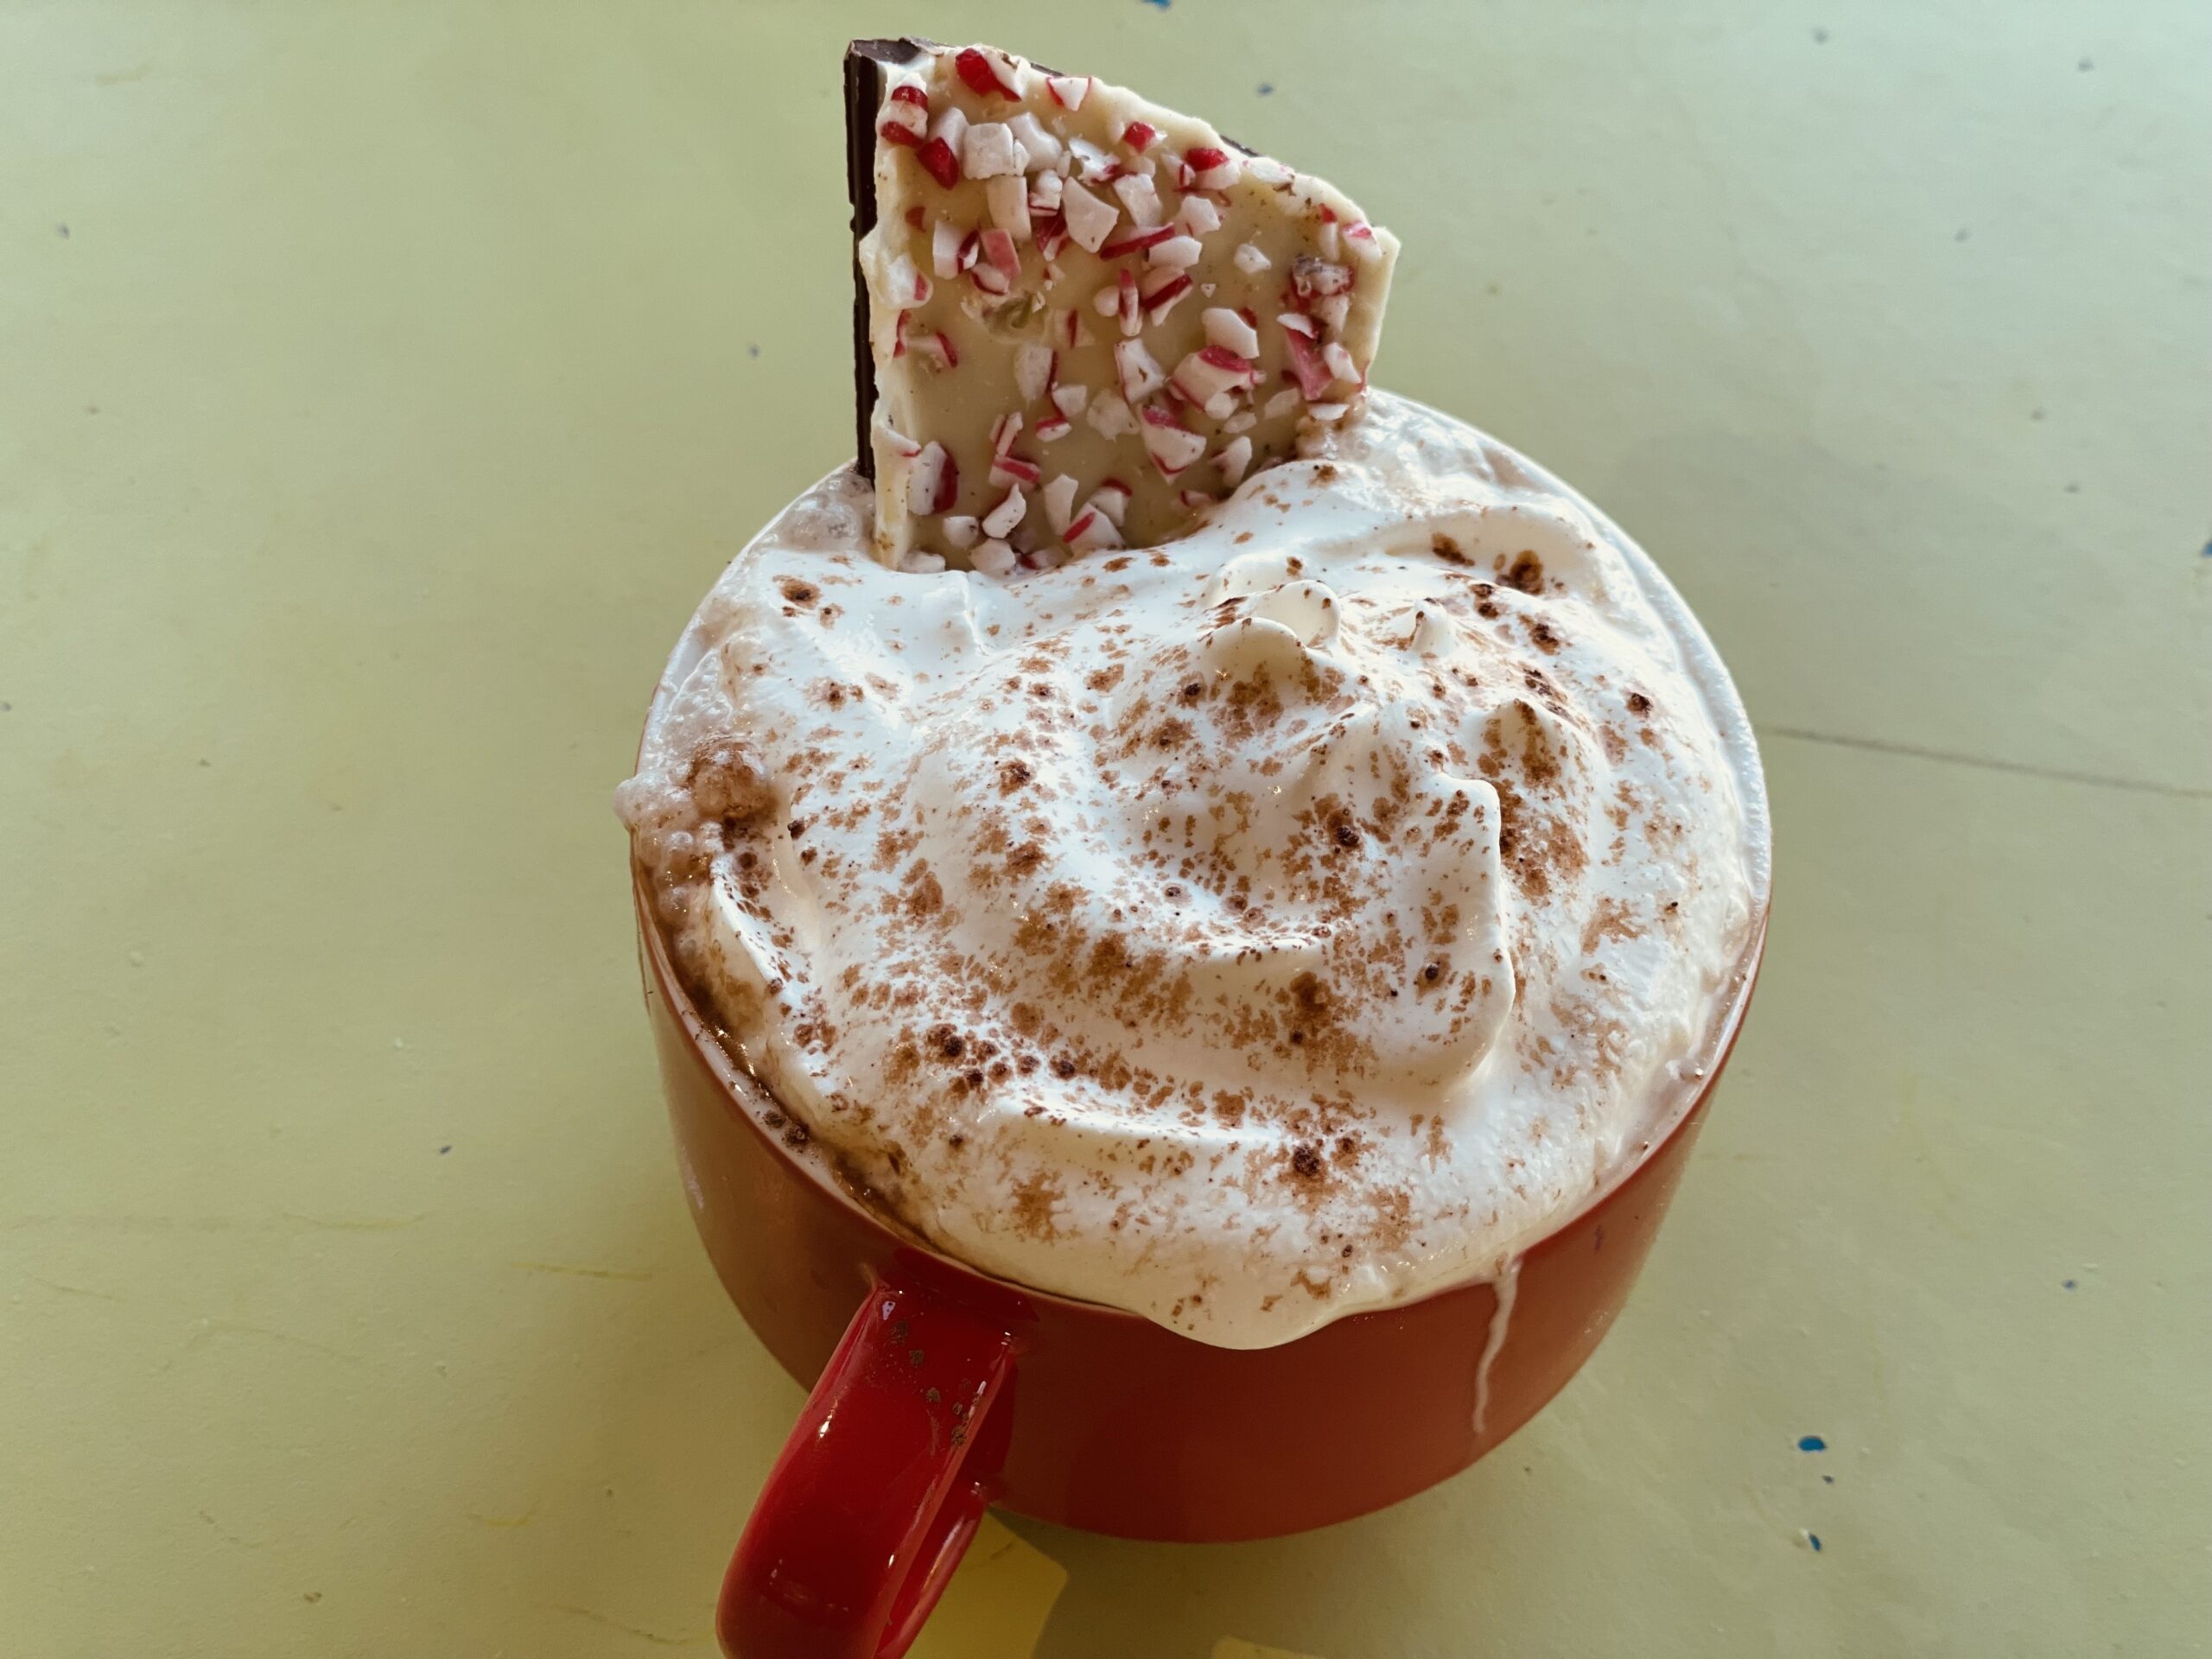 Tuxedo peppermint latte includes dark and white chocolate, vanilla, peppermint and is garnished with whipped cream and homemade peppermint bark. Honey Badger Coffee House, Rohnert Park. (Mya Constantino)